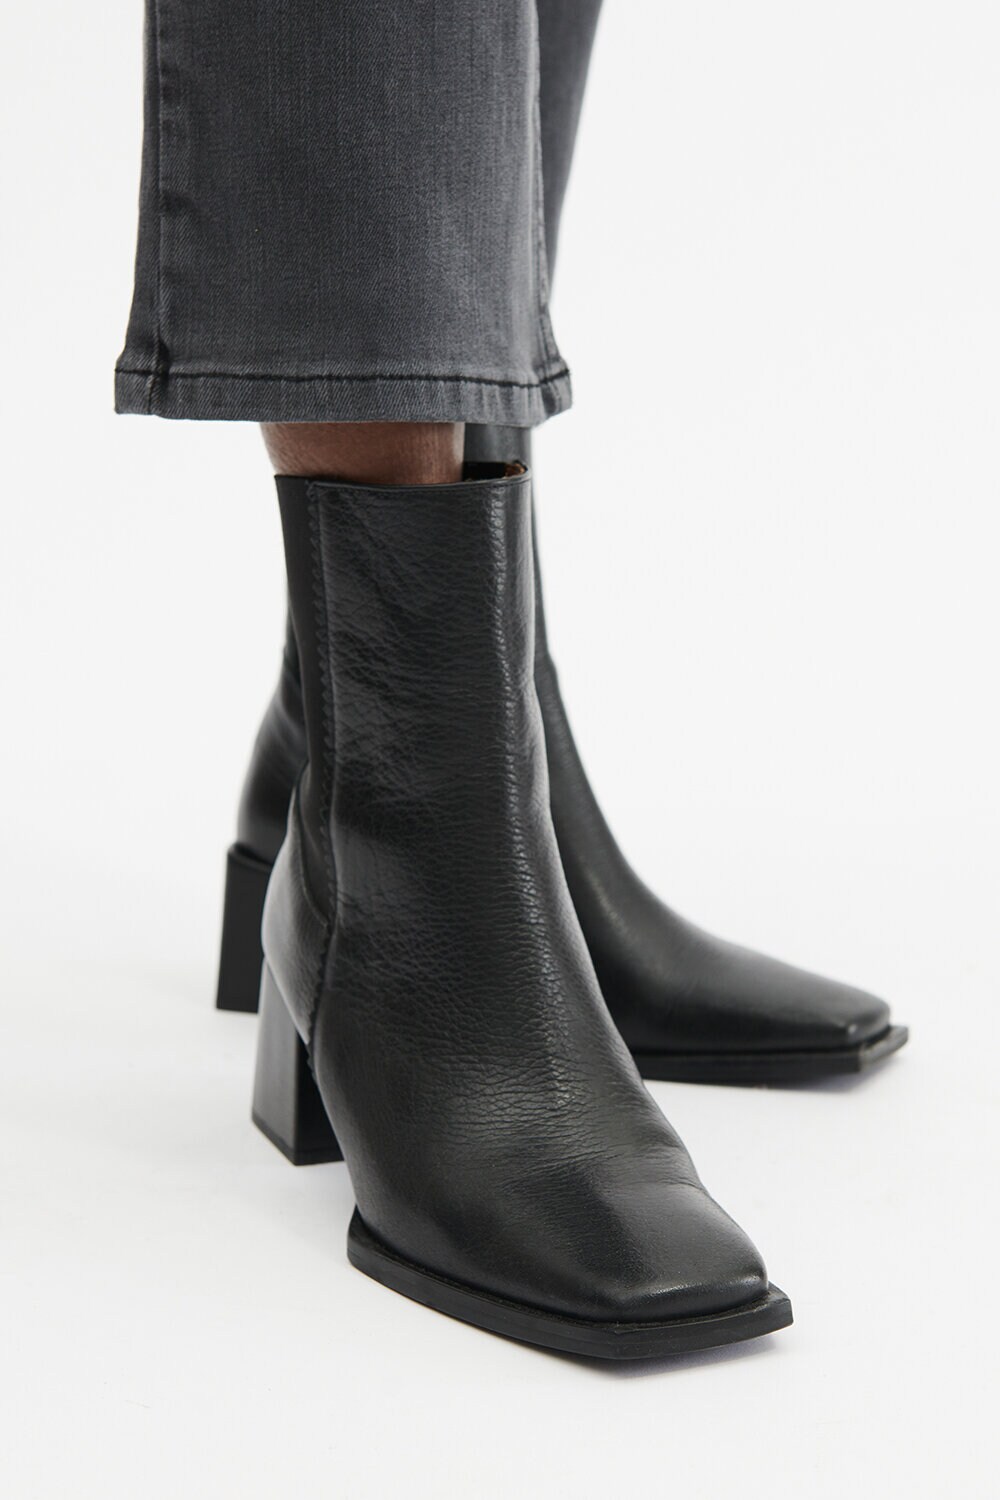 Ghent Boots